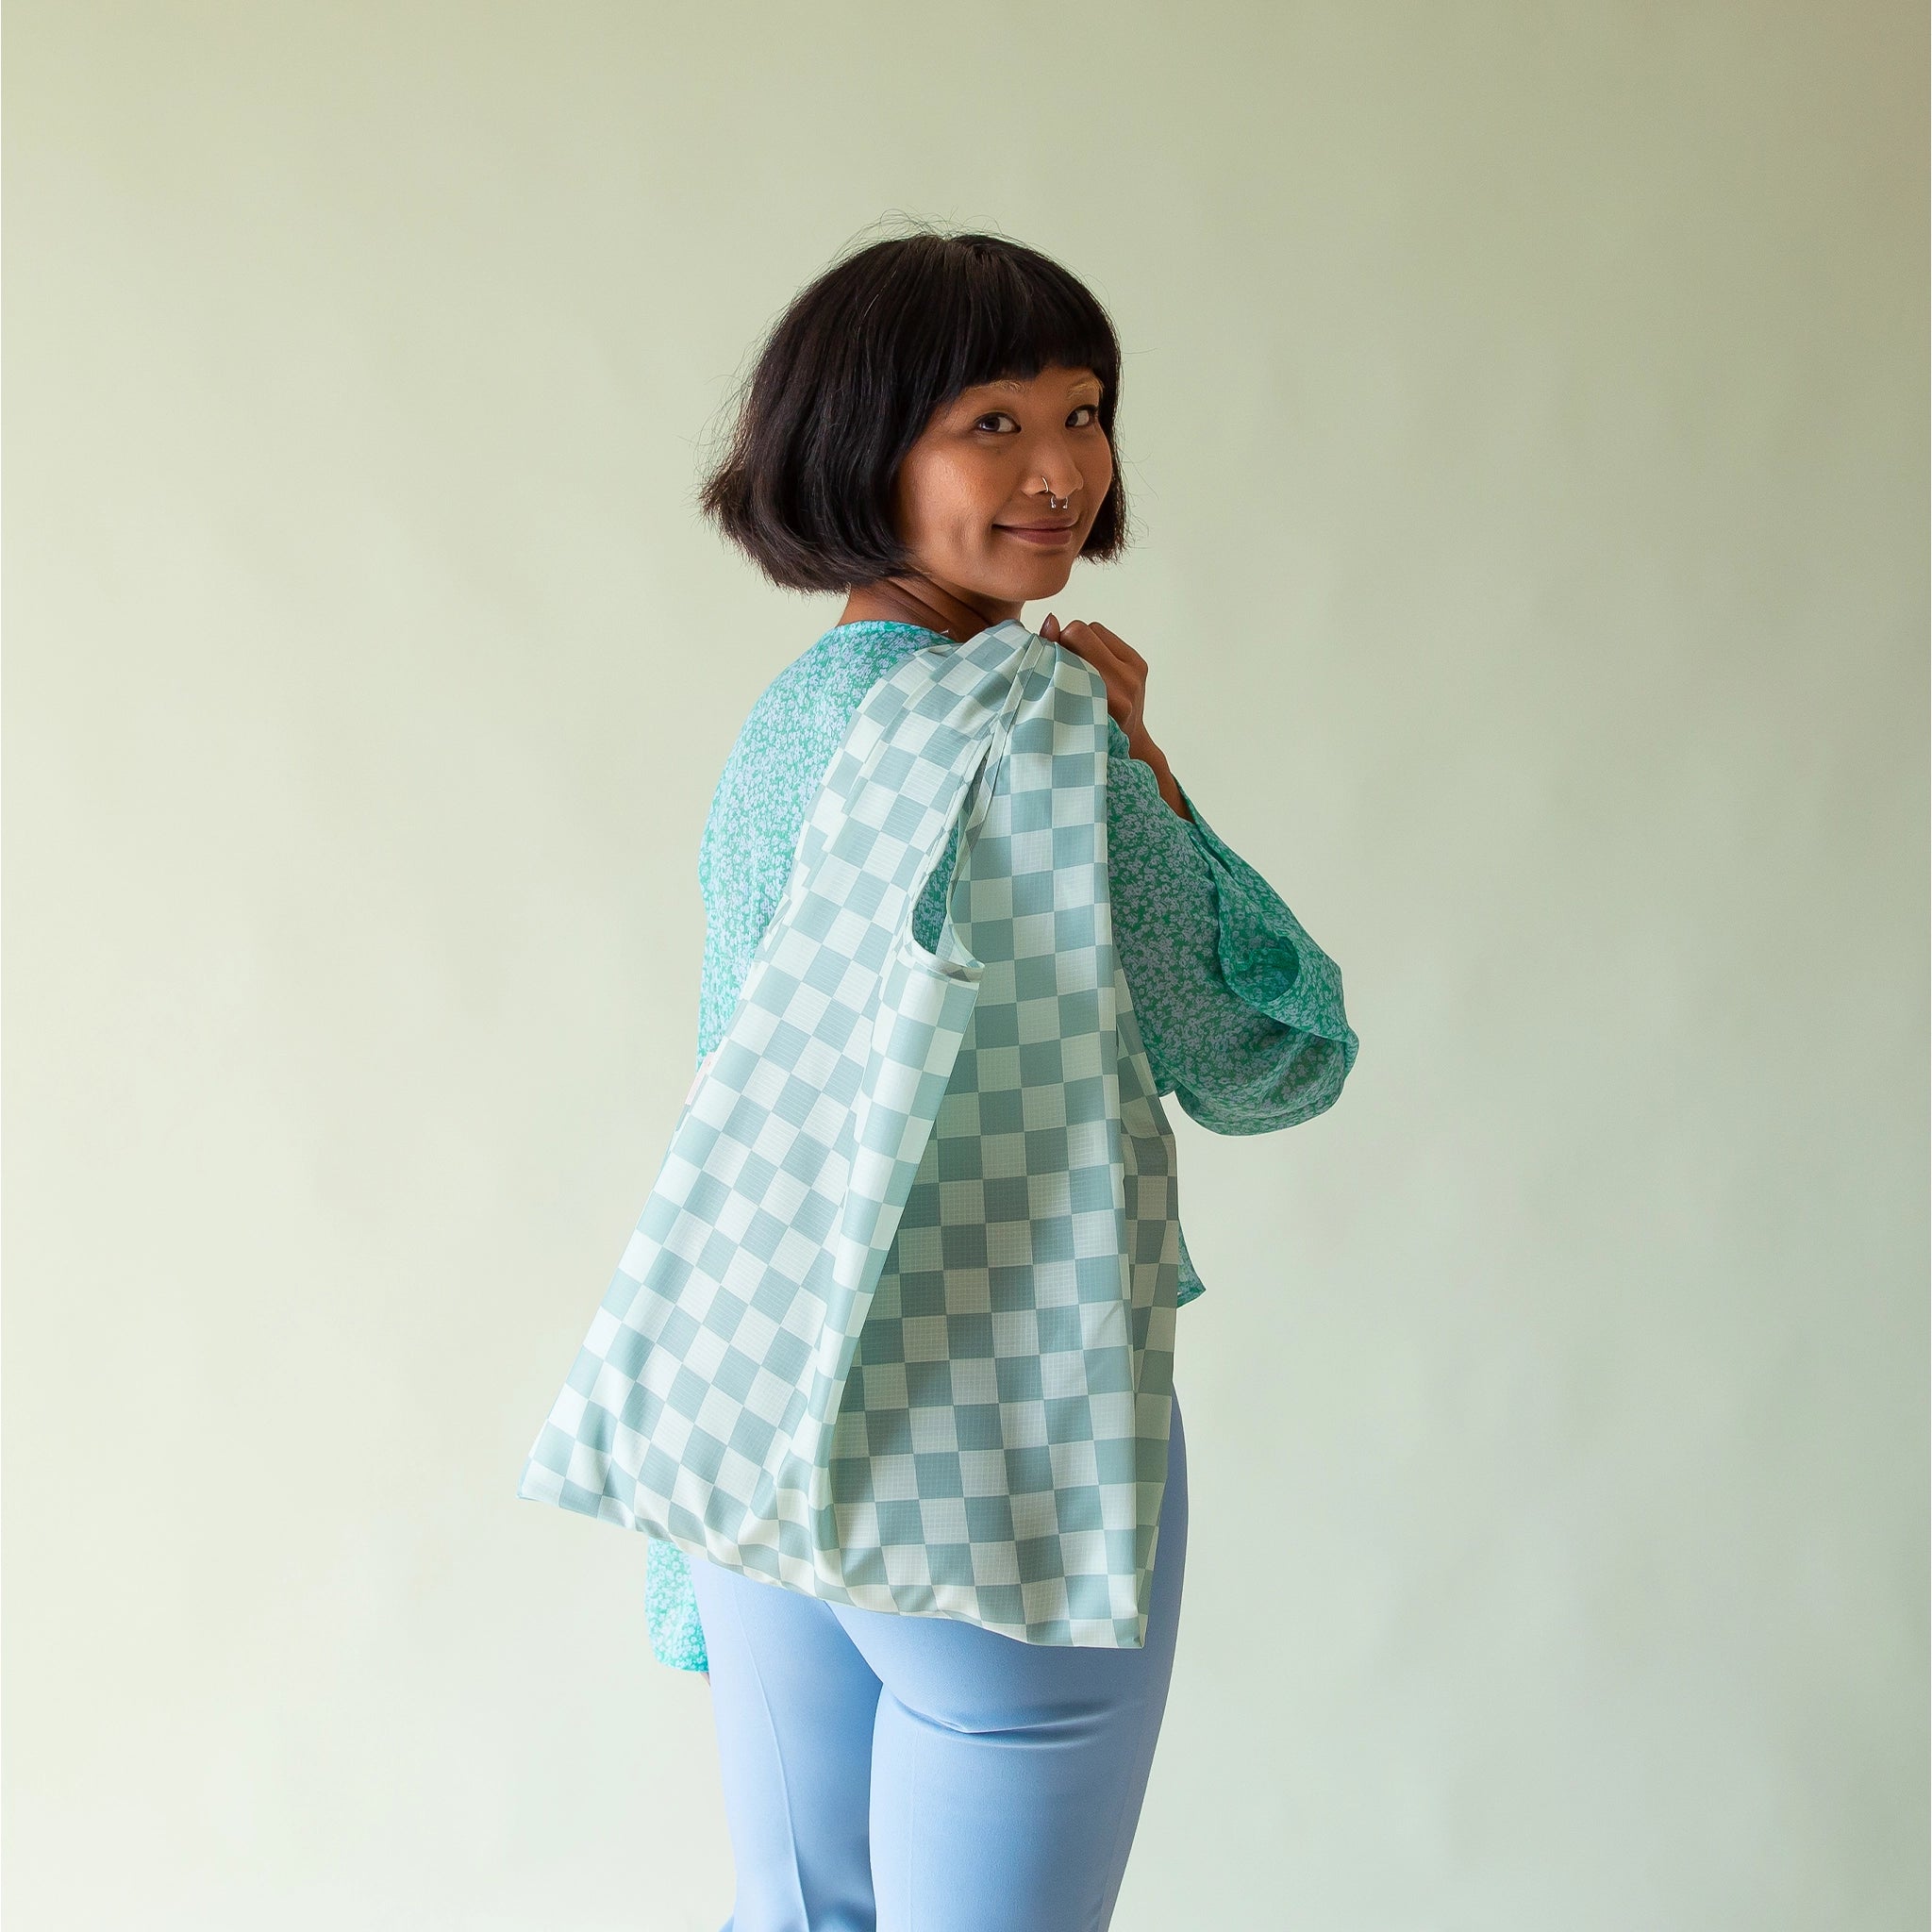 On a light blue background is a model holding a turquoise and light blue checkered print nylon bag.  